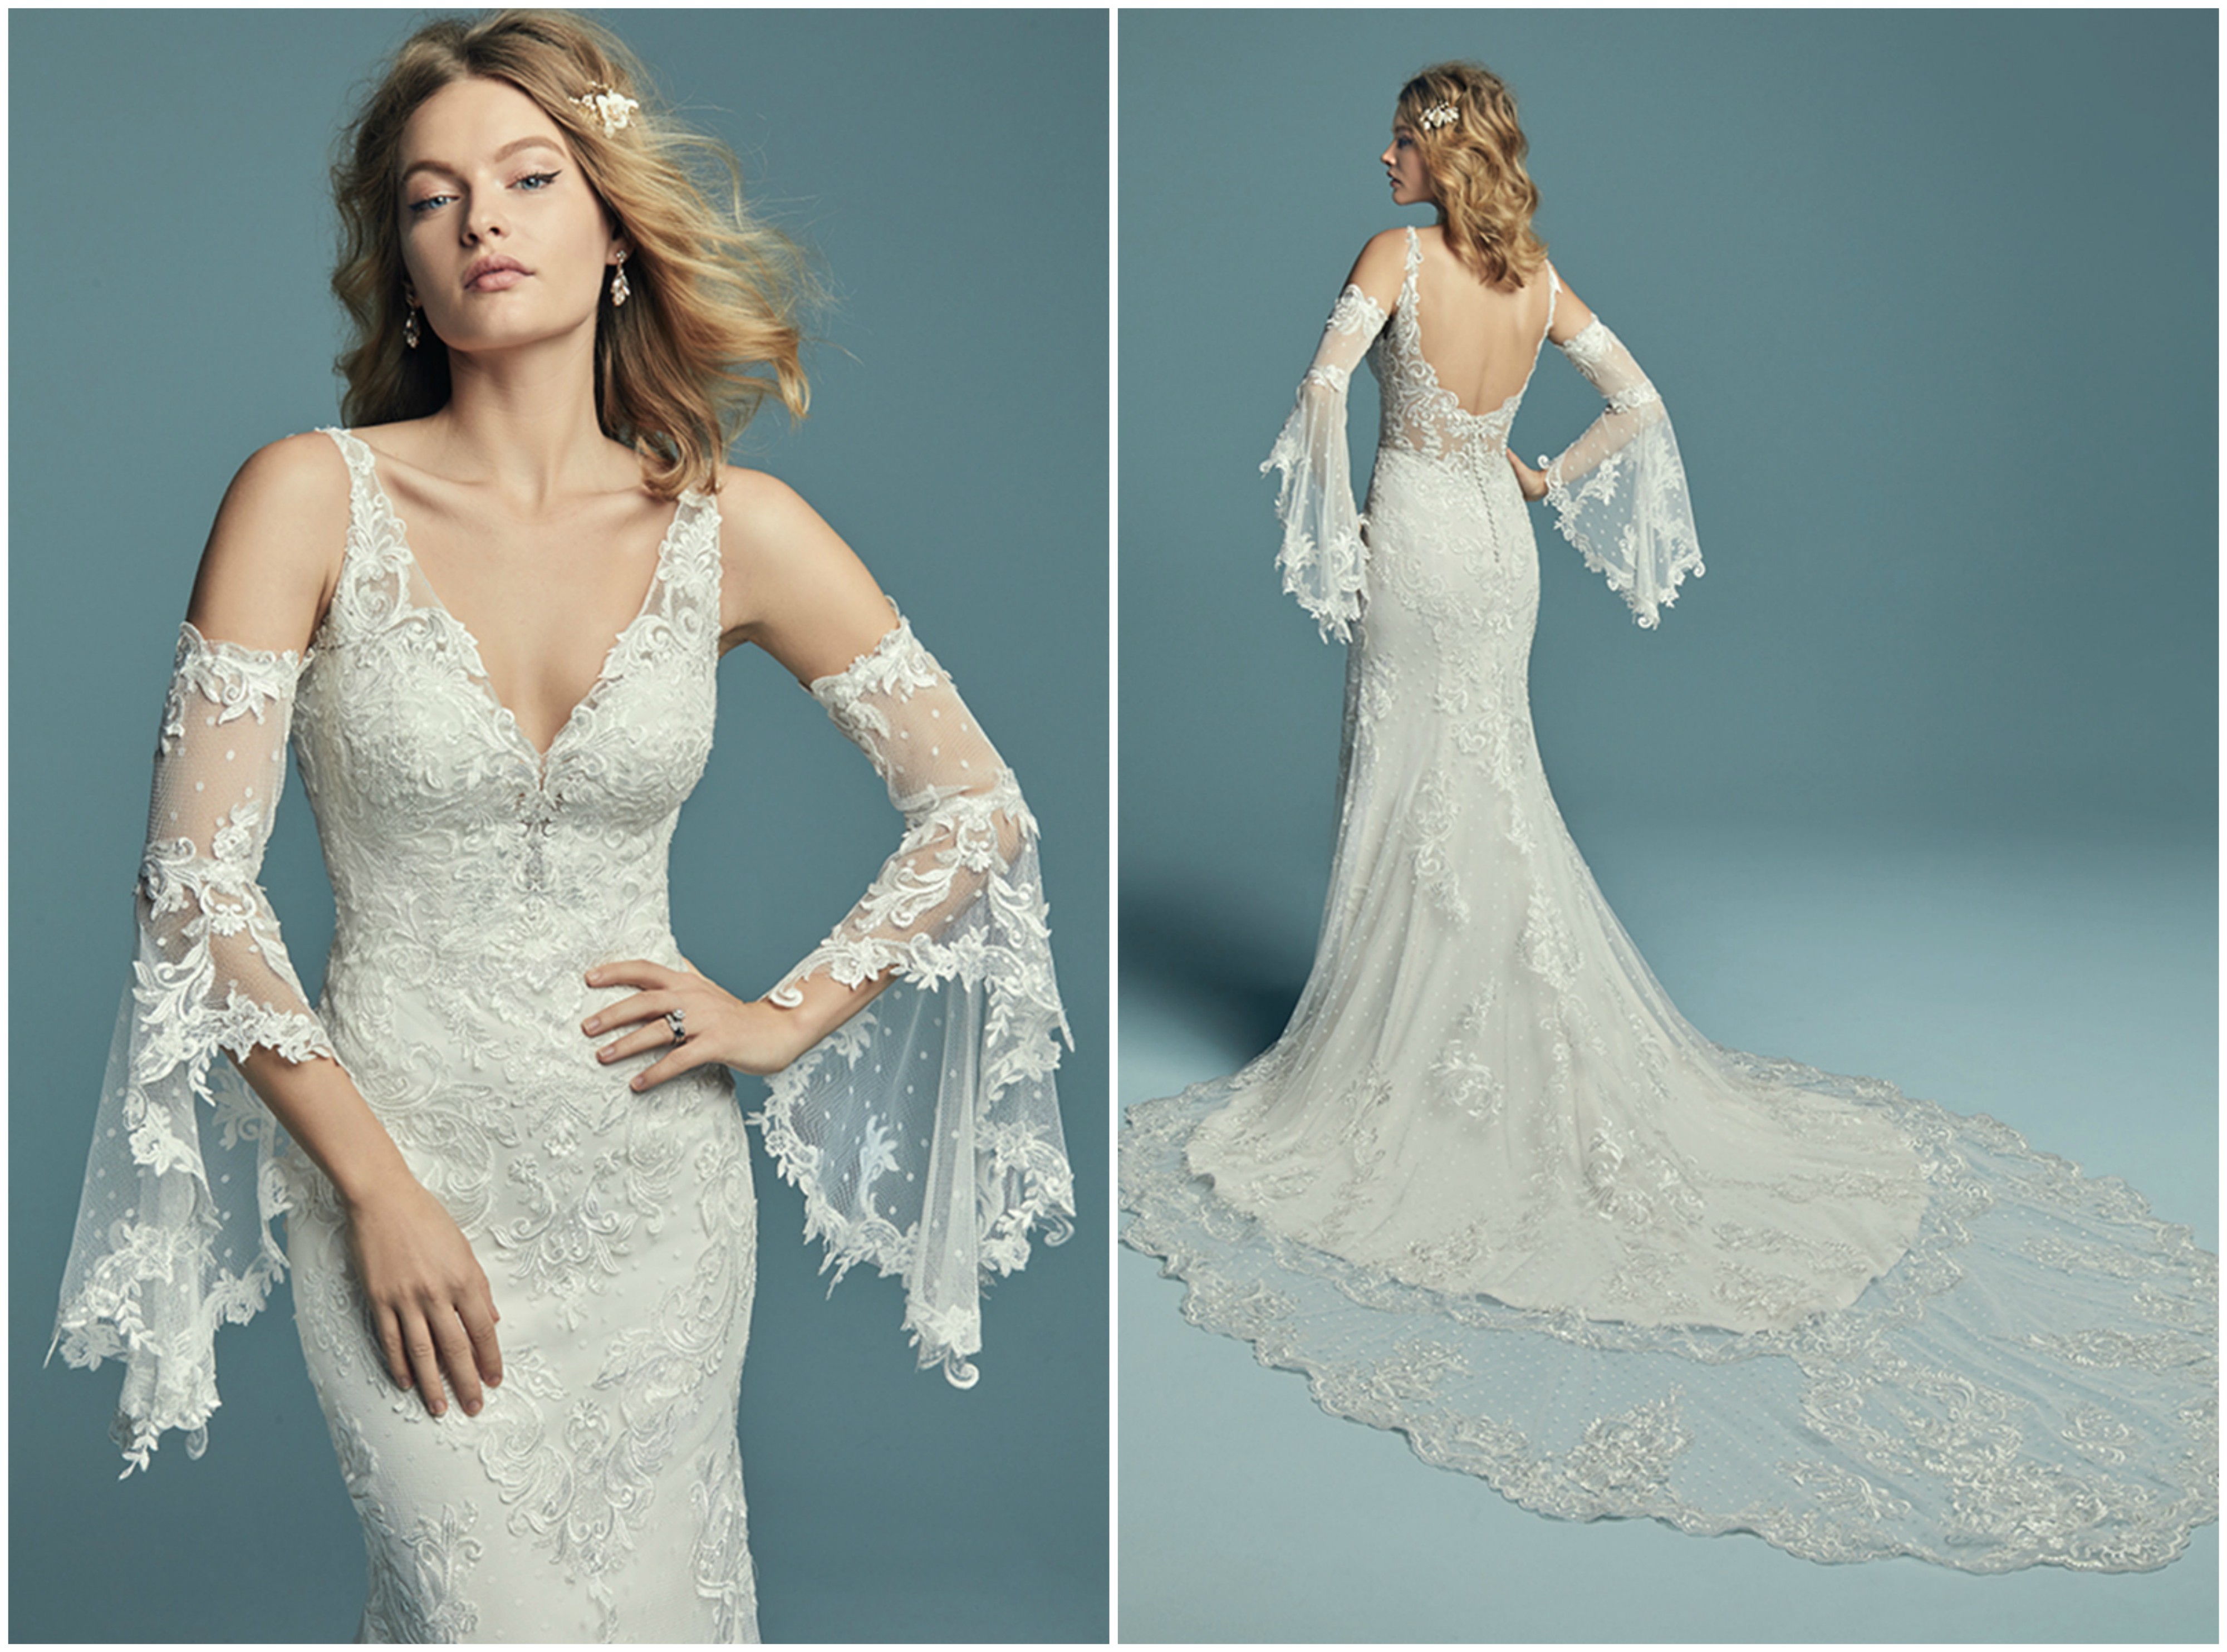 <a href="https://www.maggiesottero.com/maggie-sottero/lucienne/11277" target="_blank">Maggie Sottero</a>